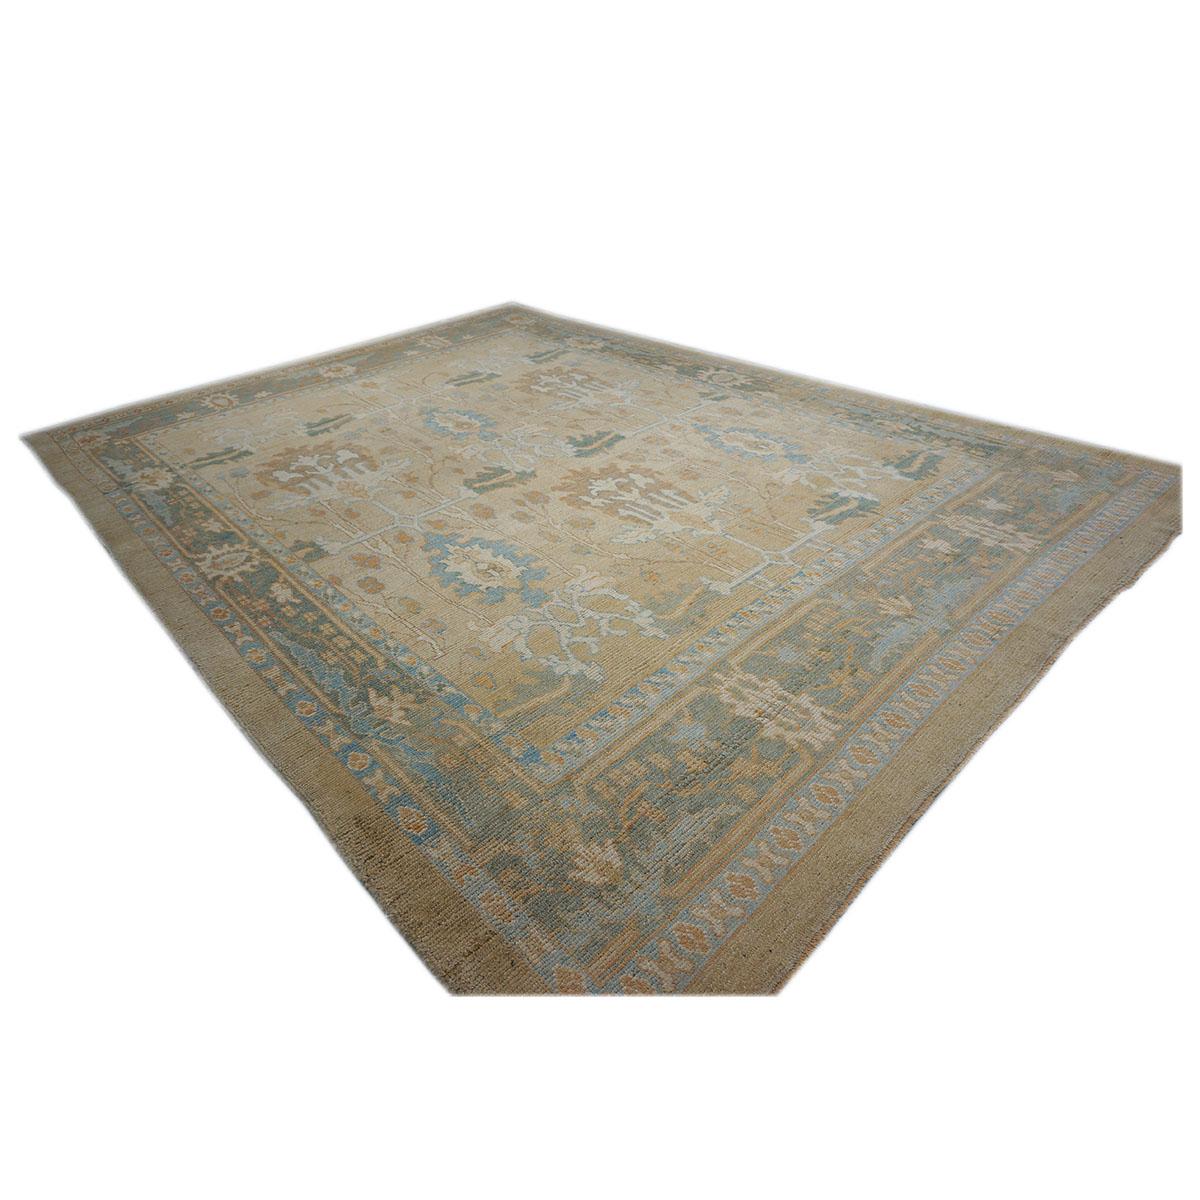 Turkish 21st Century William Morris Donegal Carpet Ivory and Tan For Sale